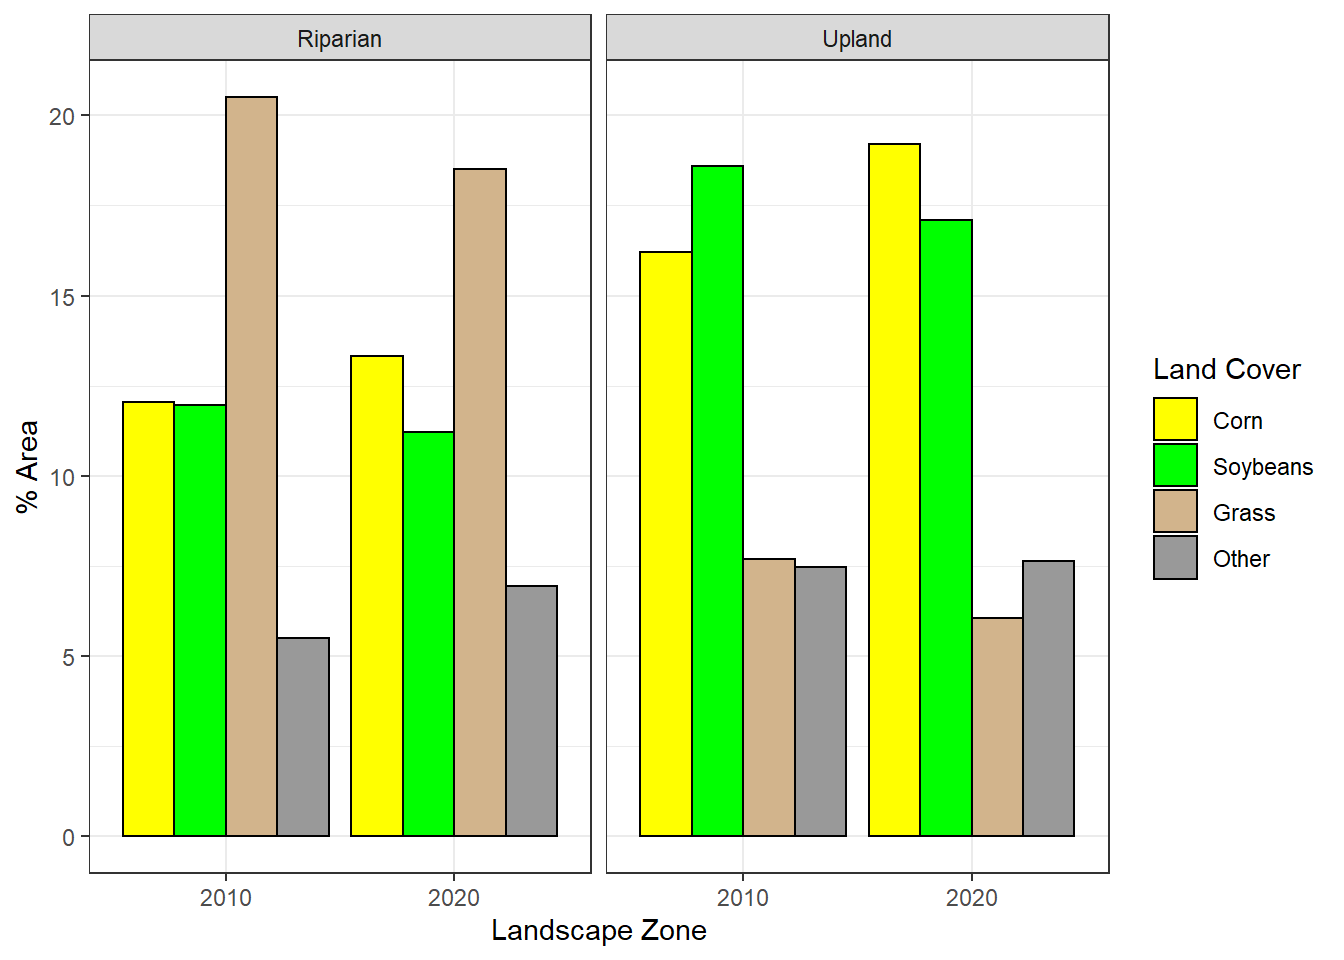 Areal distribution of crop types by landscape zone (riparian versus upland) and year.